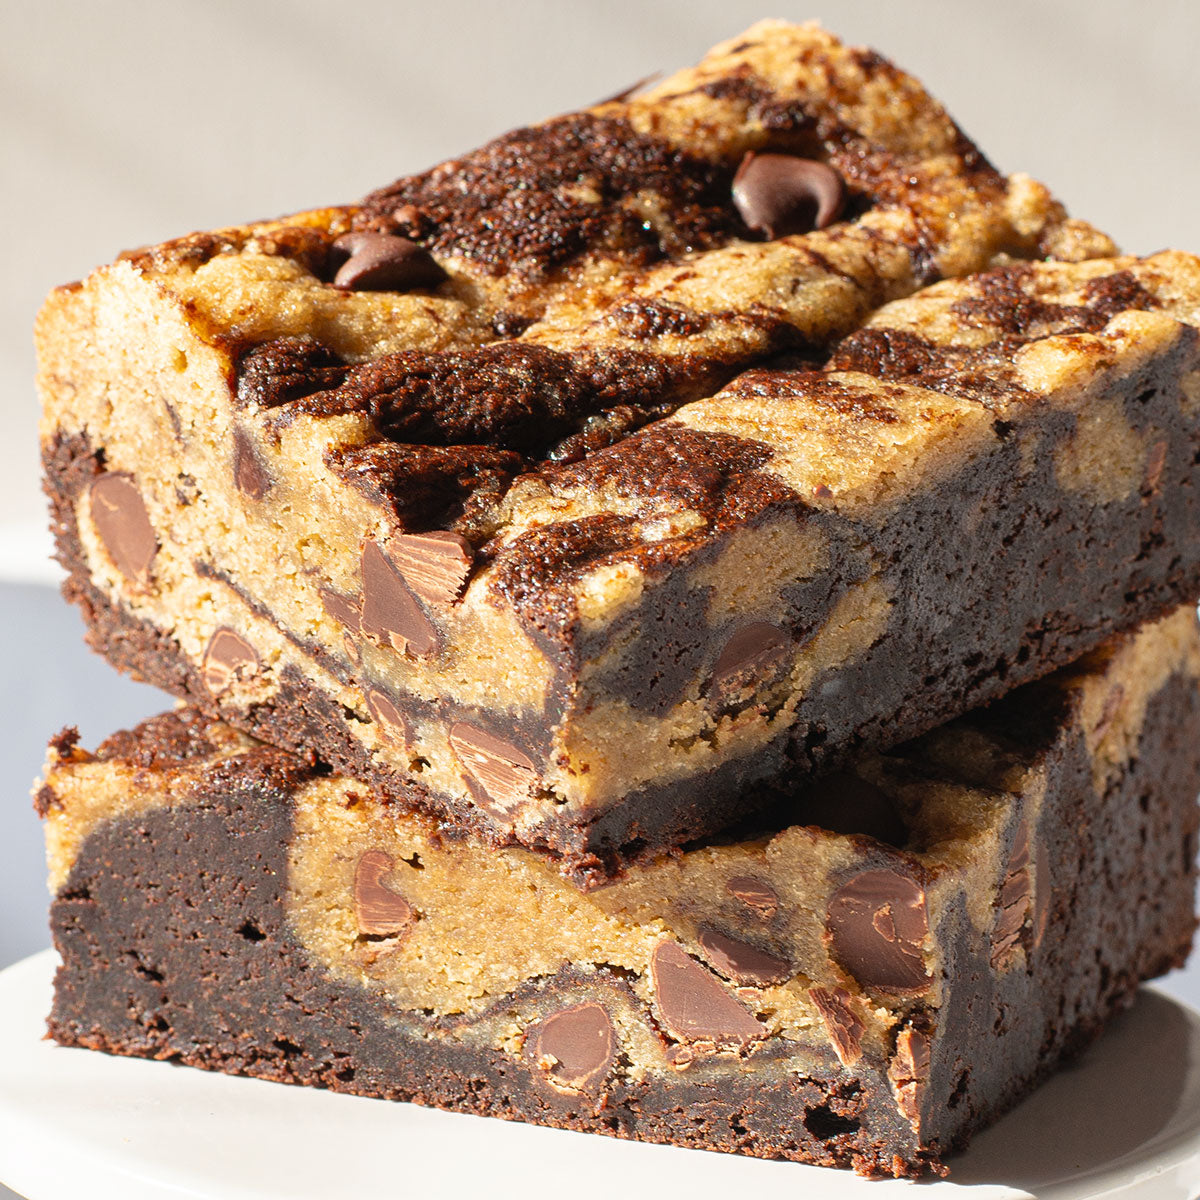 A mouthwatering image of Brookies, showcasing the perfect fusion of chocolate chip cookie dough and fudgy brownie dough in a single bar, delivering the best of both worlds.